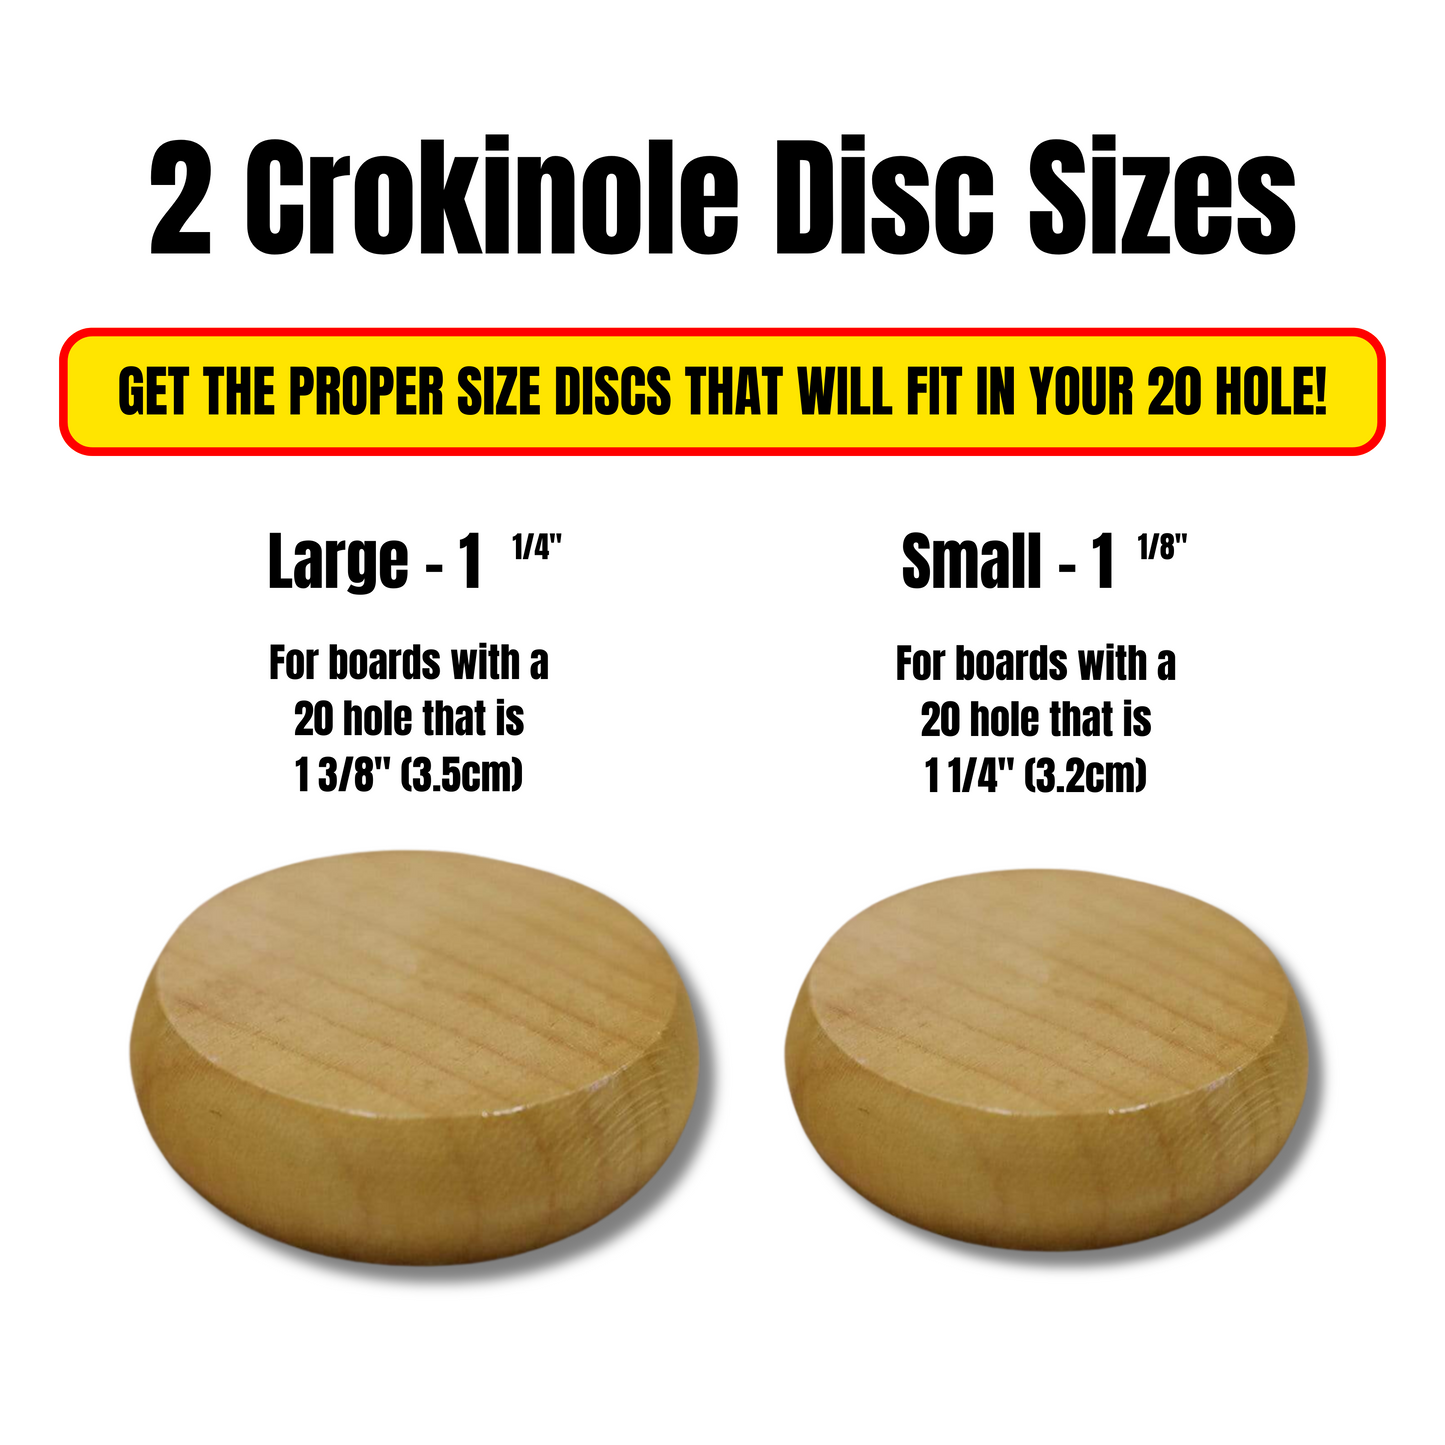 4 Player Crokinole Disc Party Pack (52 Discs) - Harvest Edition